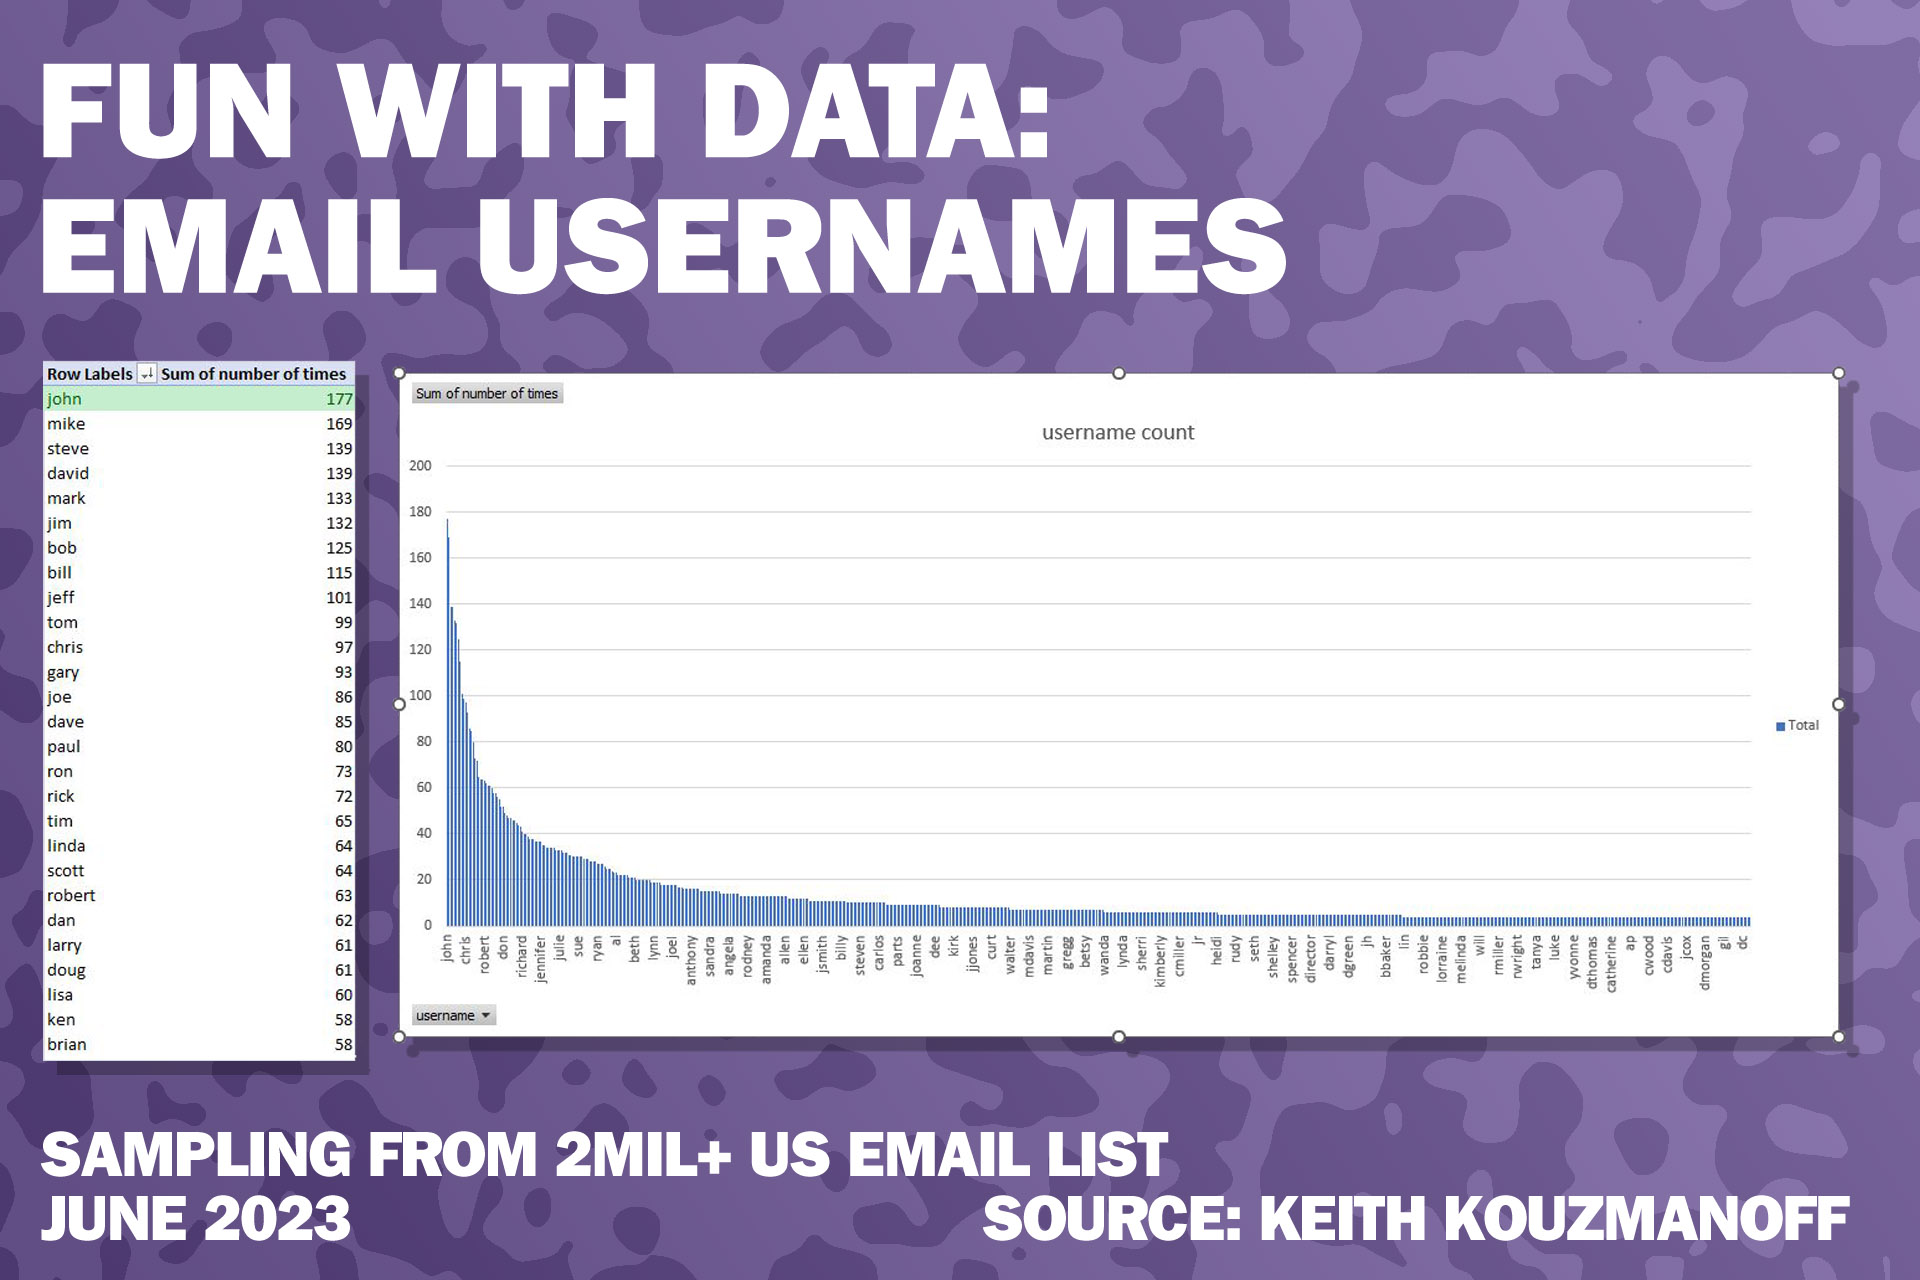 Fun with data: Email username rankings